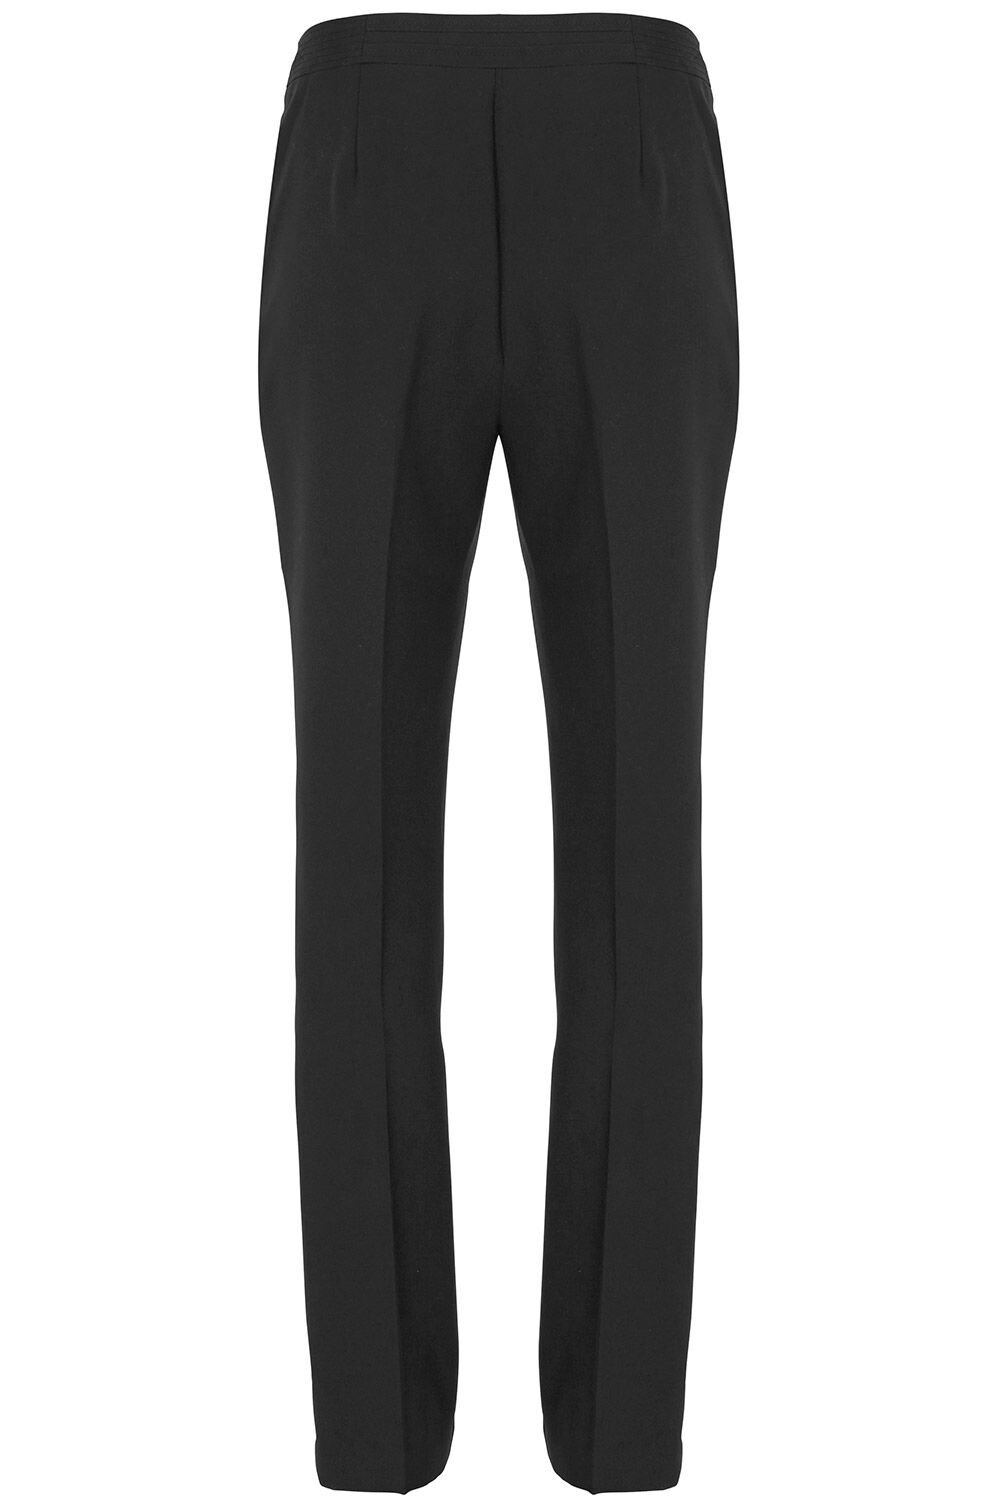 Buy Exclusive Topman Trousers  Men  184 products  FASHIOLAin